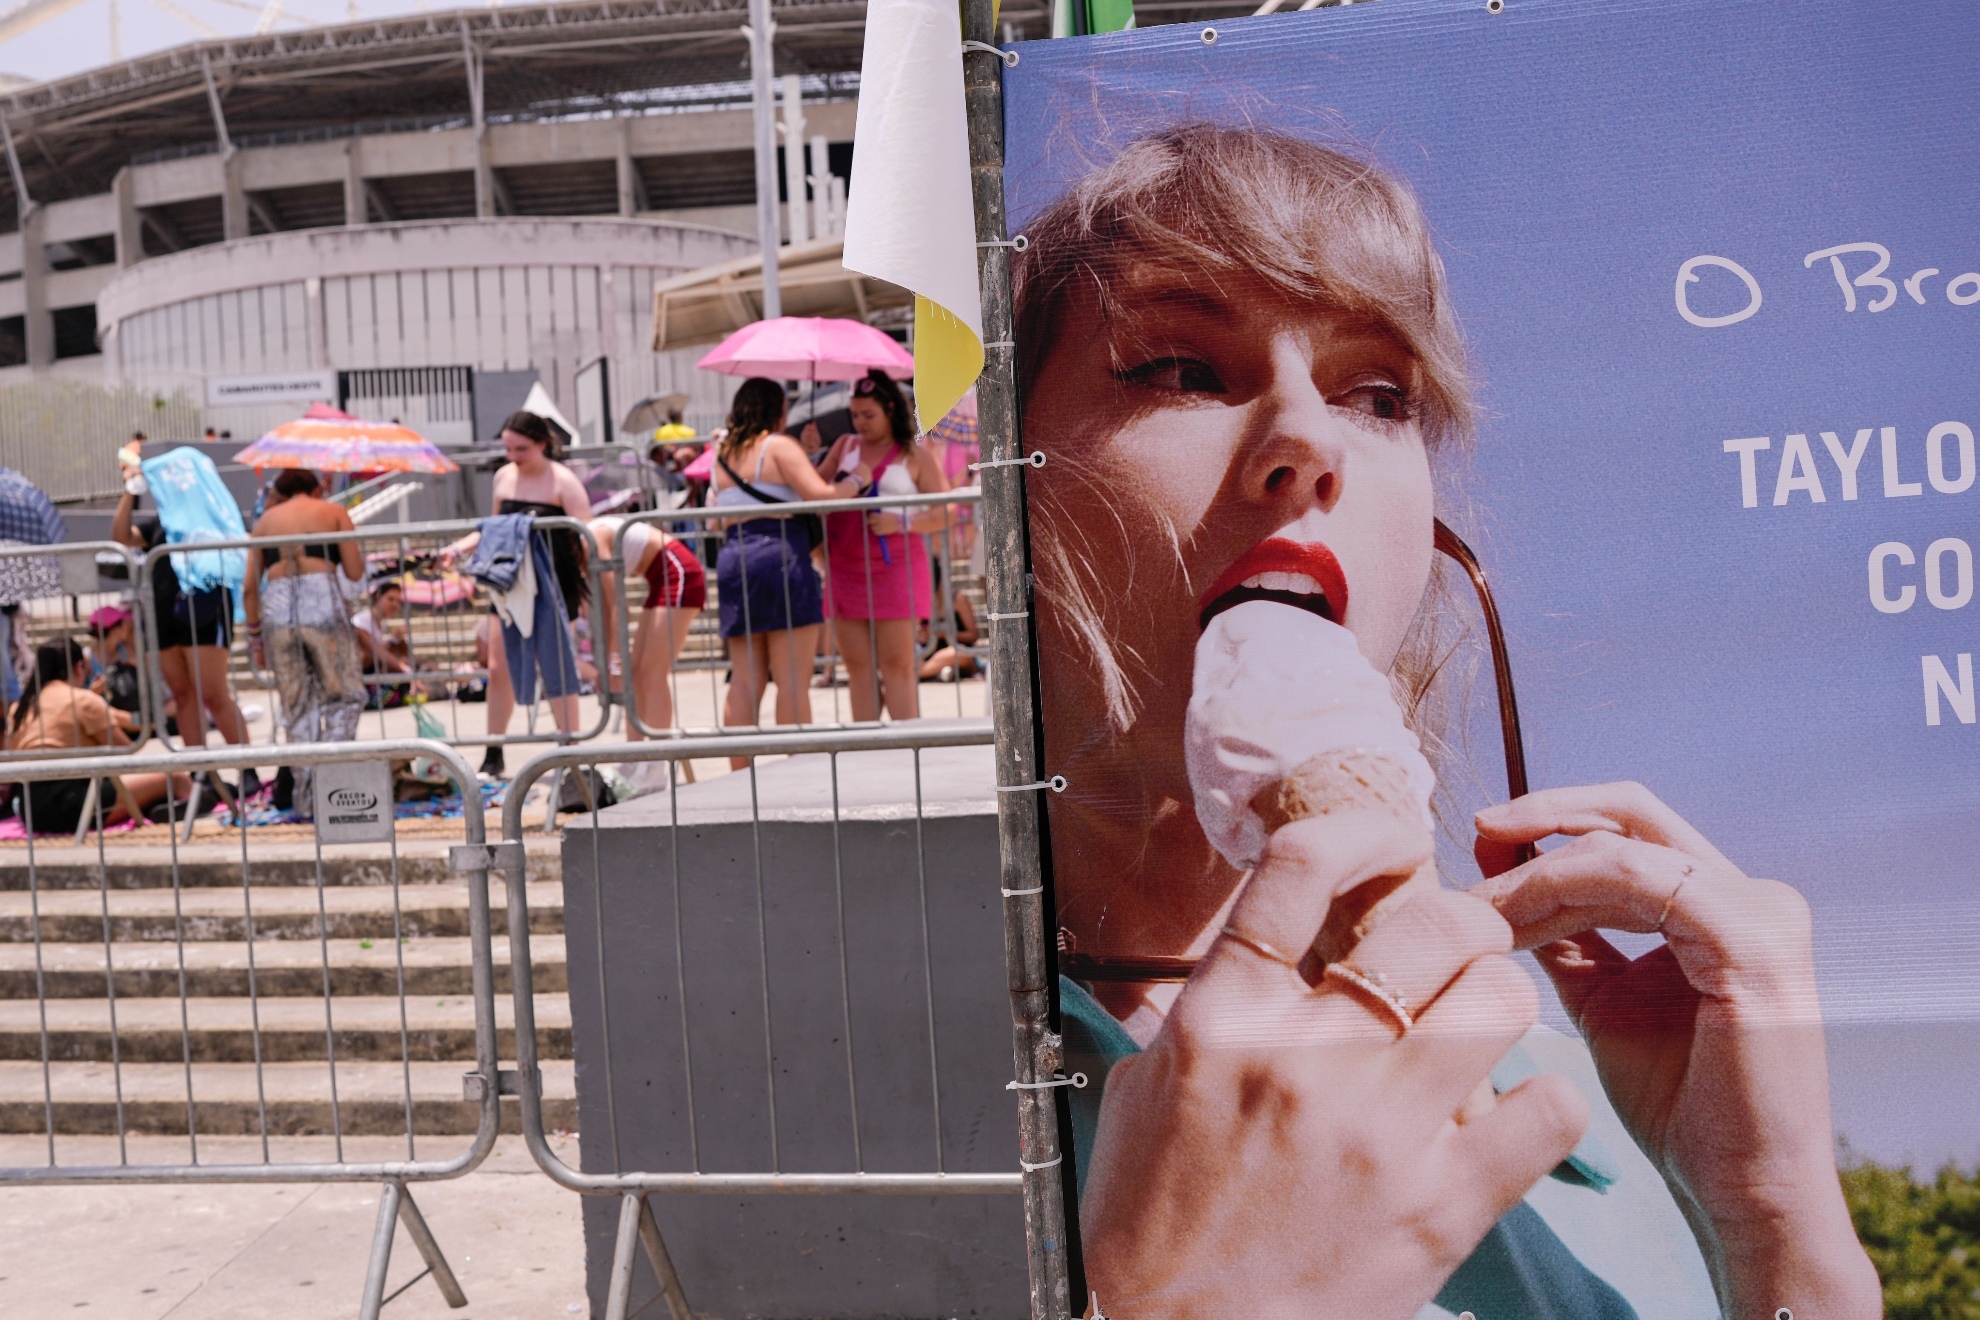 Fans outside of Nilton Santos Olympic Stadium in Rio, right before a Taylor Swift concert.